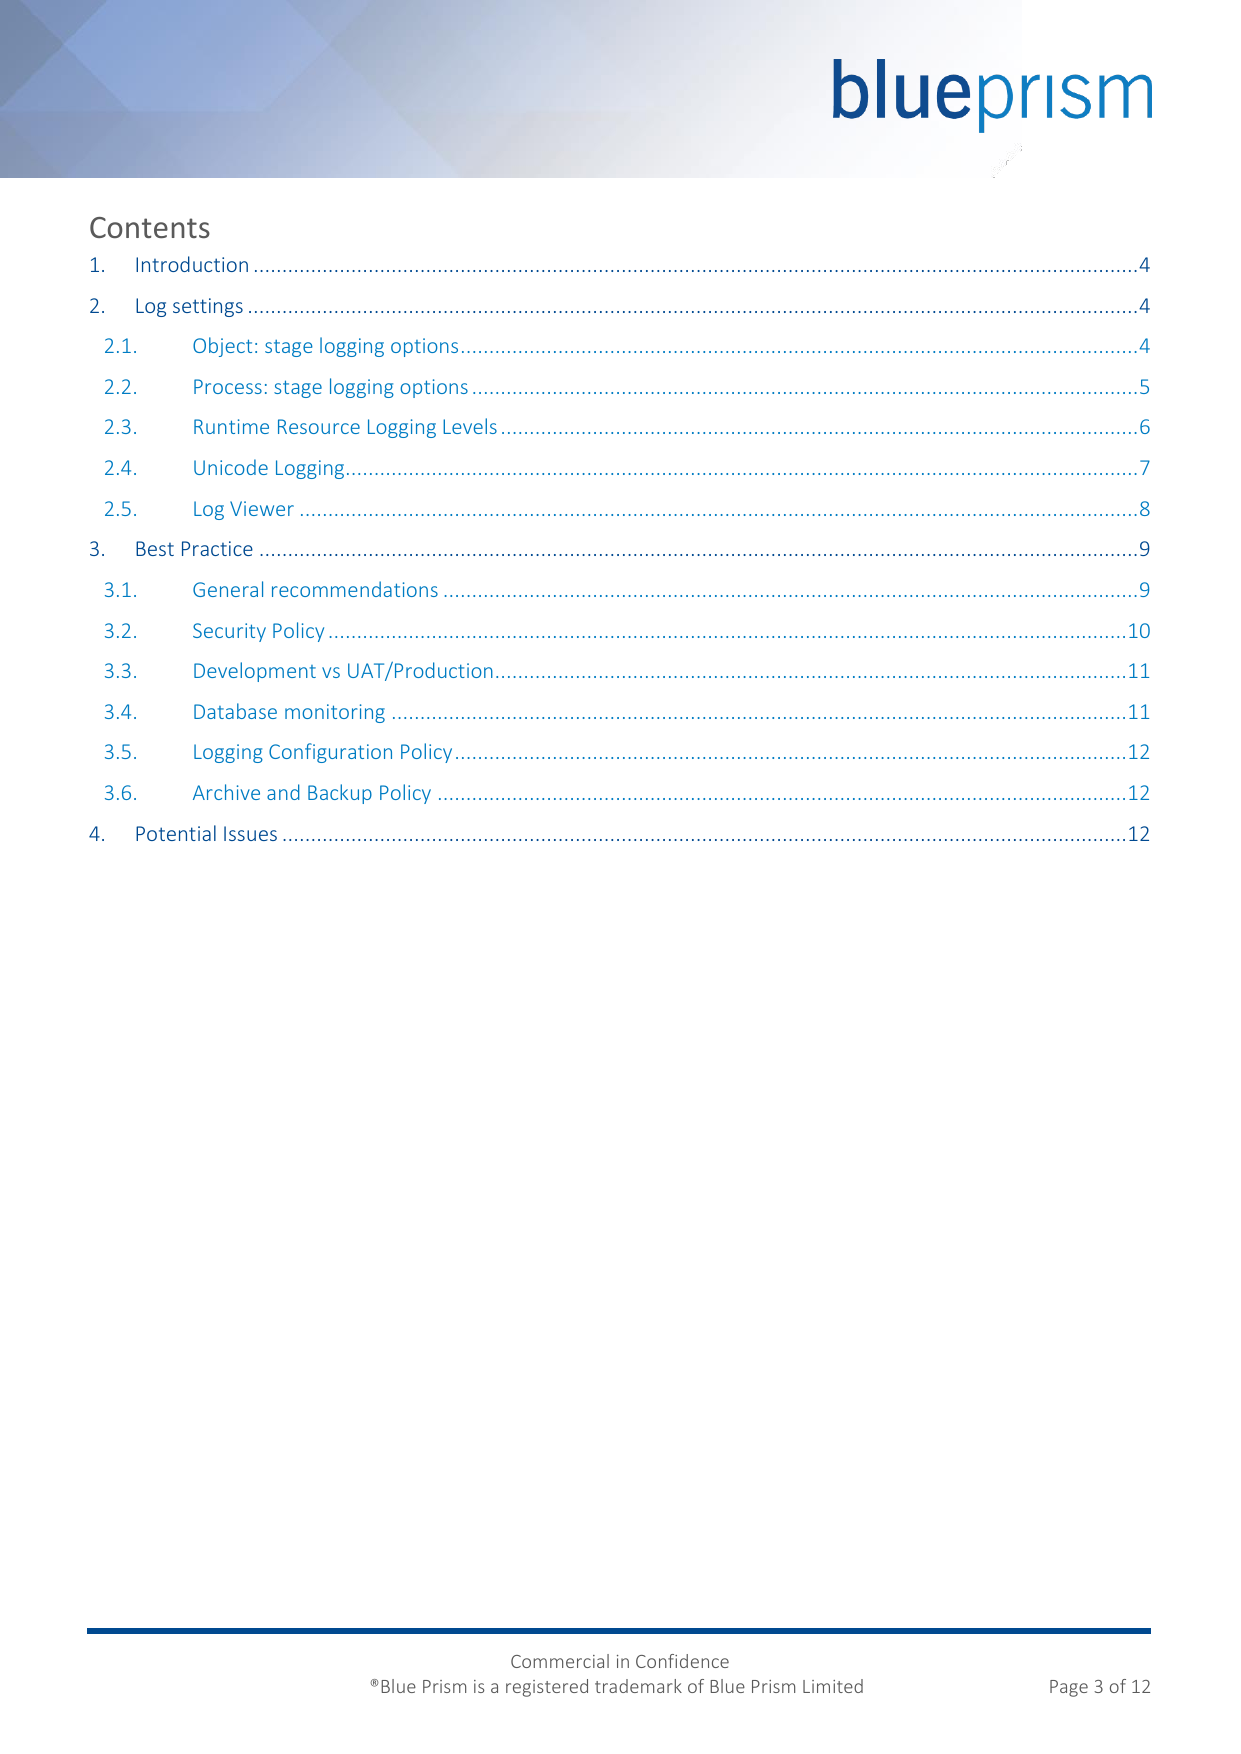 Page 3 of 12 - Blue Prism Logging Best Practices Guide